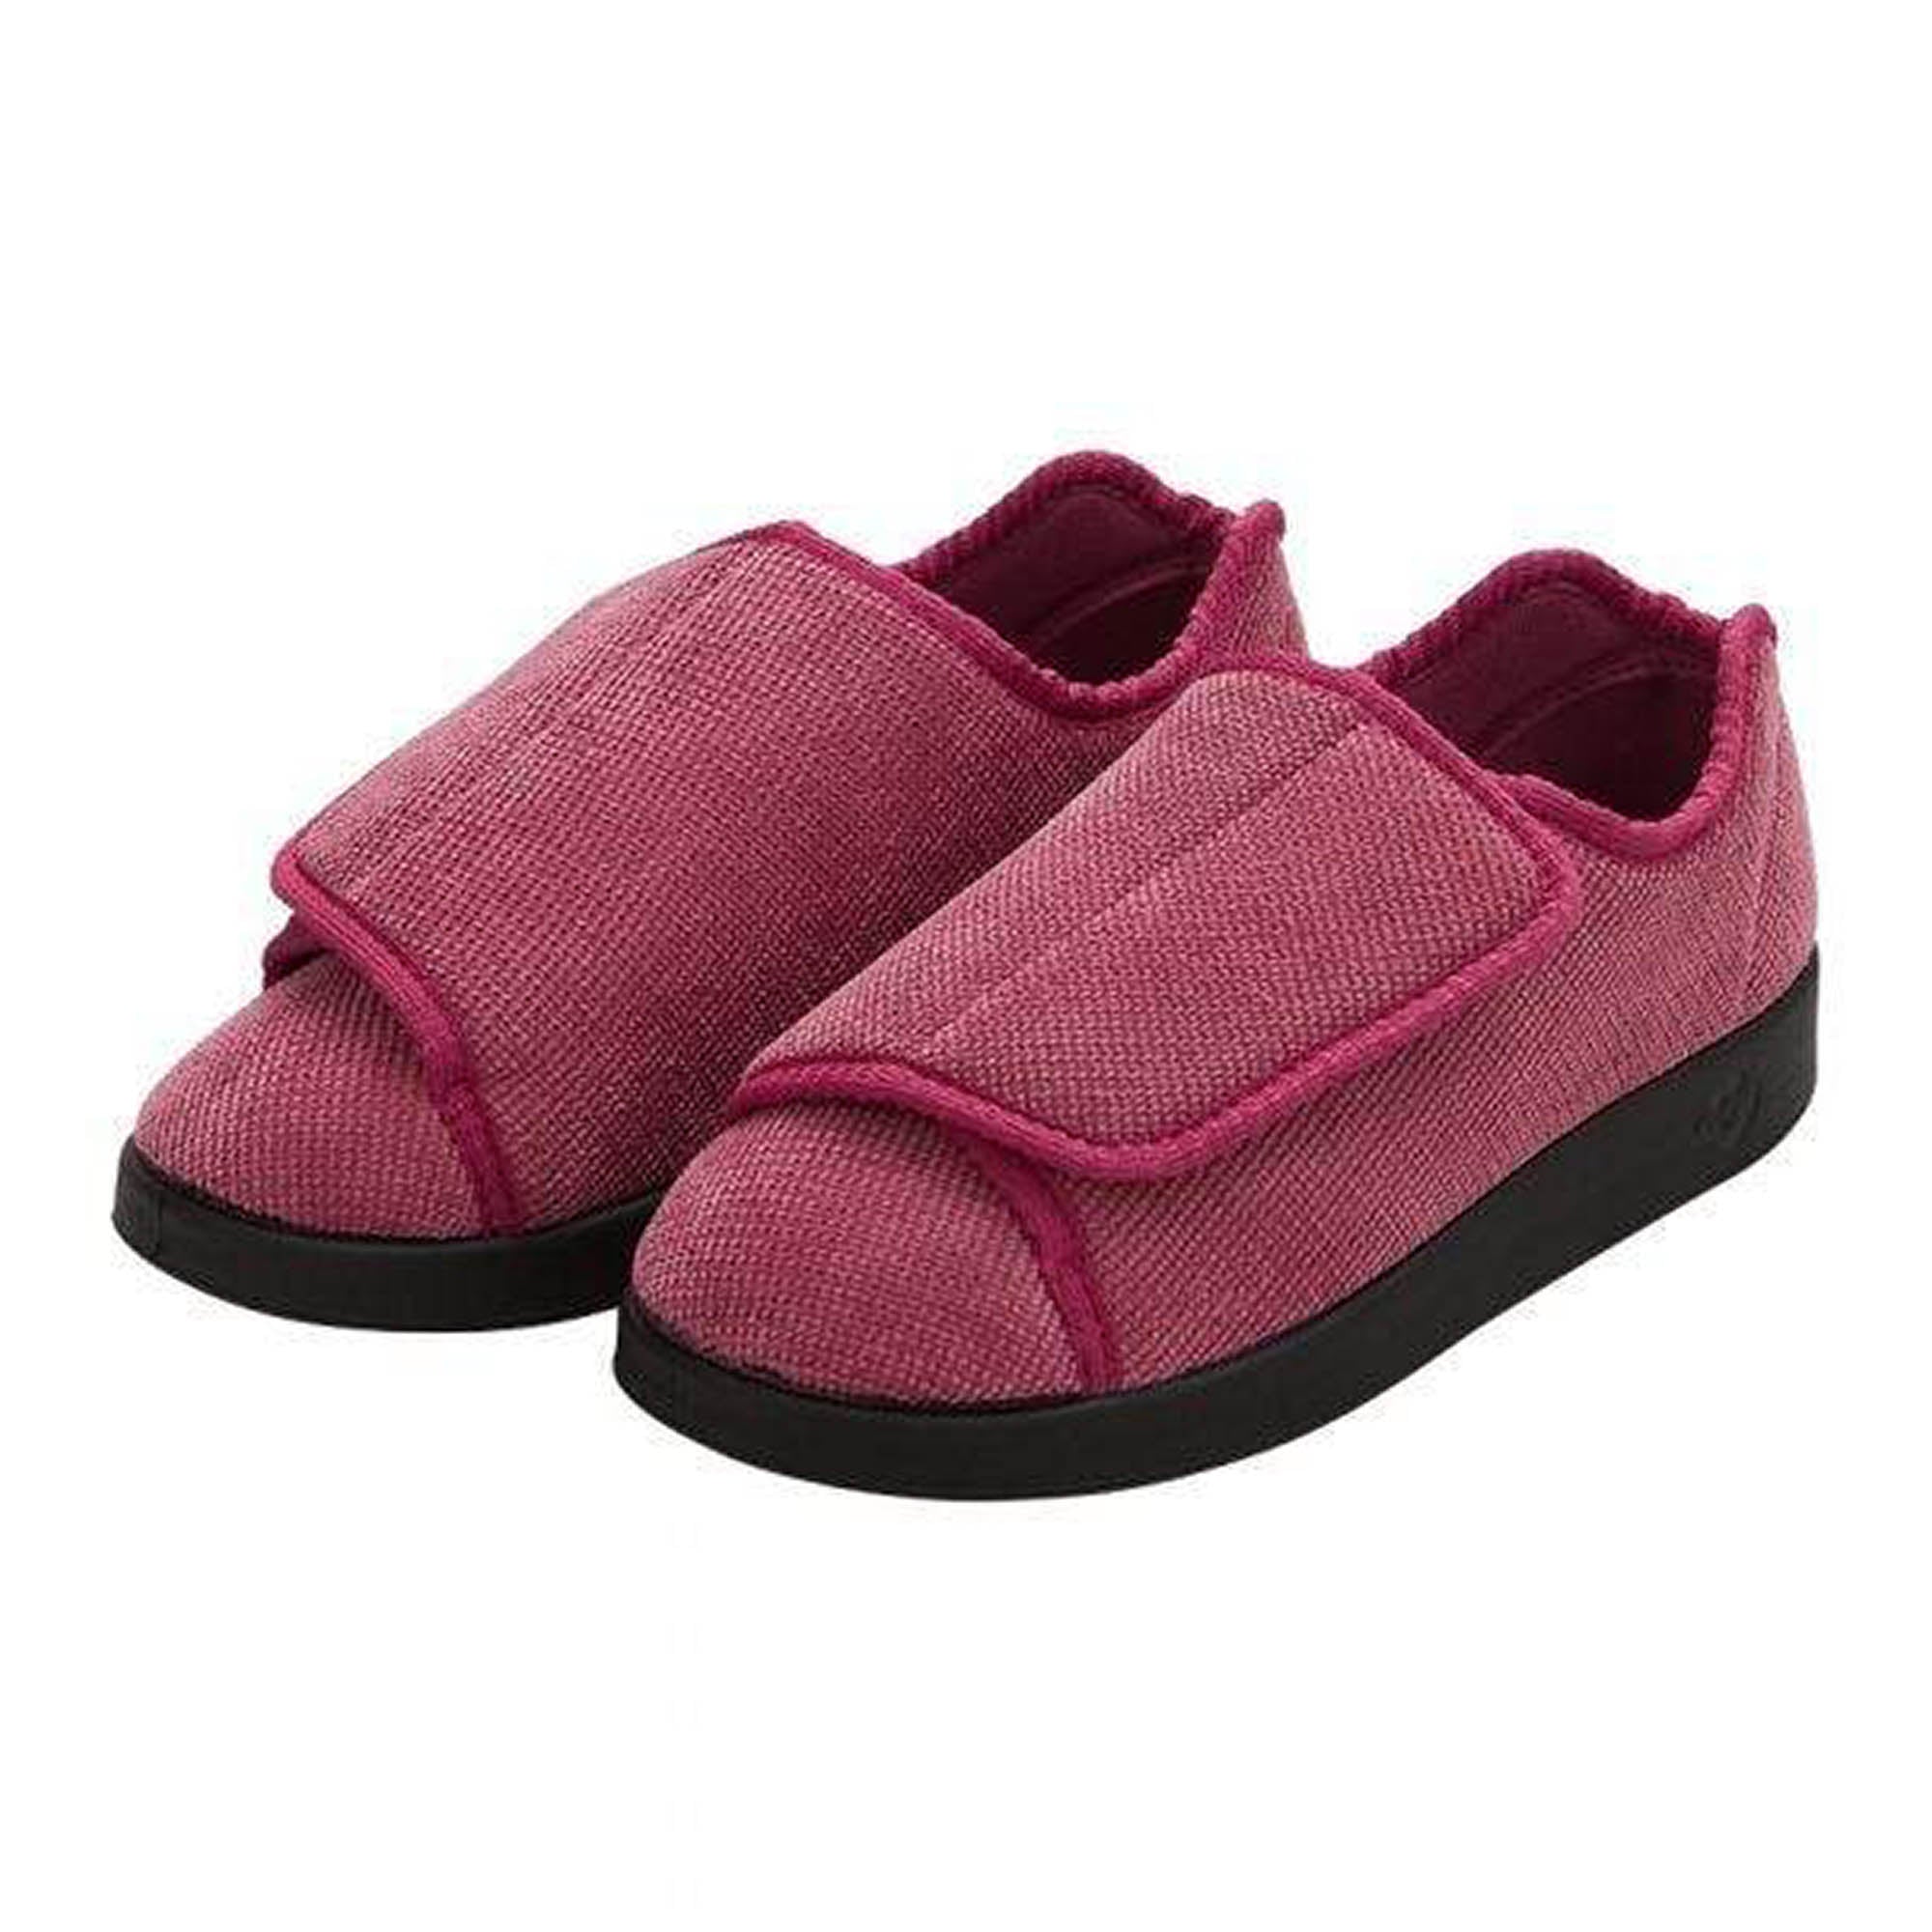 Silverts Women's Antimicrobial Extra Extra Wide Easy-Closure Slippers - Dusty Rose - 8